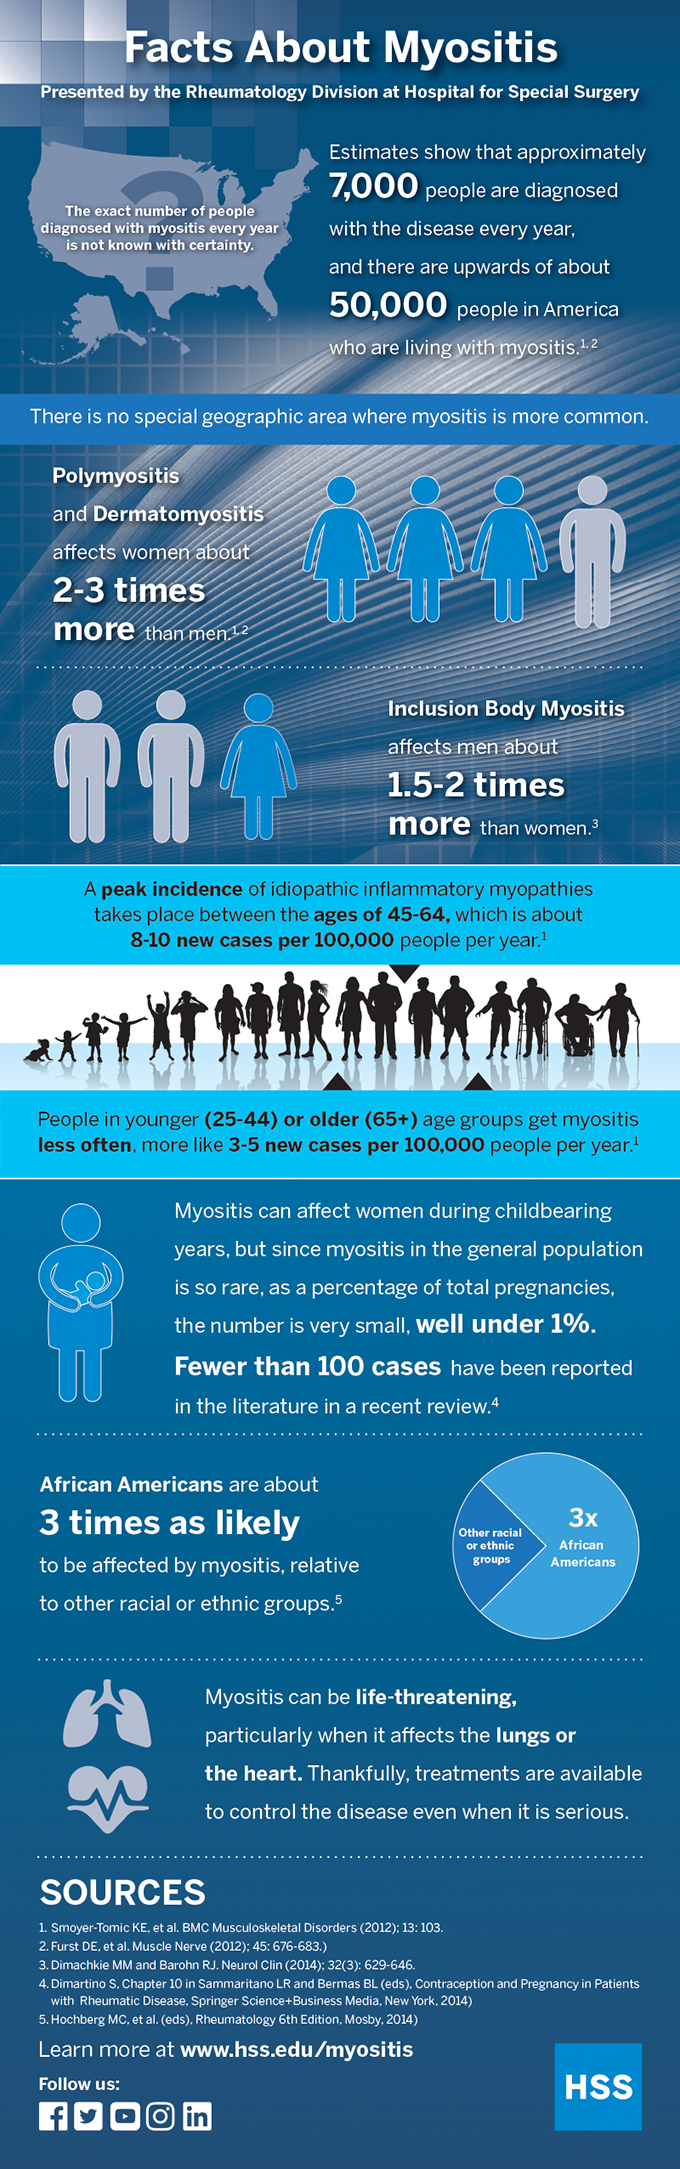 Facts about Myositis Infographic 